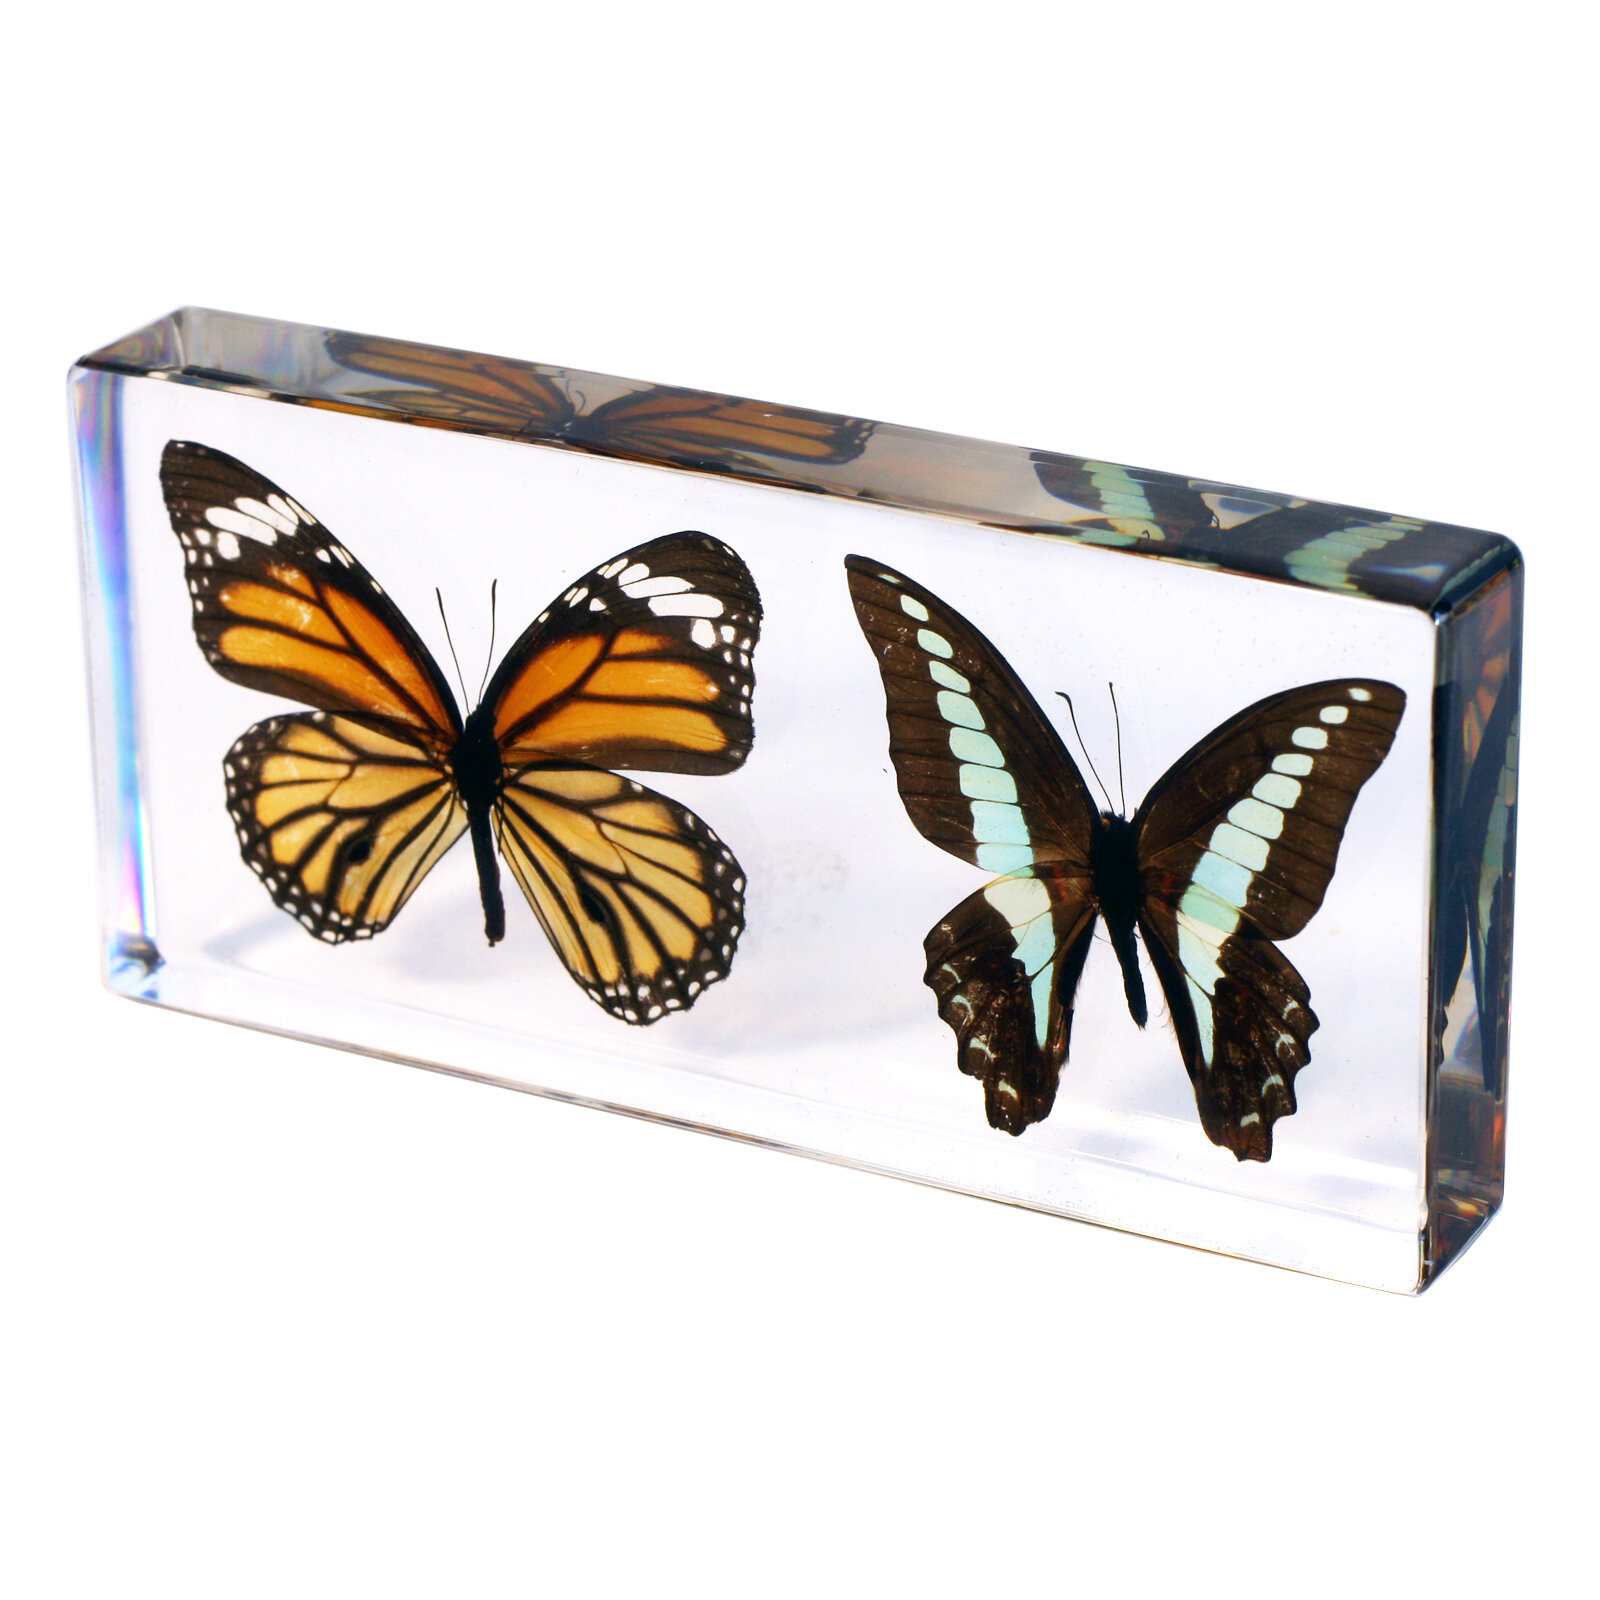 4.7 Inch Monarch Butterfly Decoration Fake Butterflies for Crafts  Artificial But